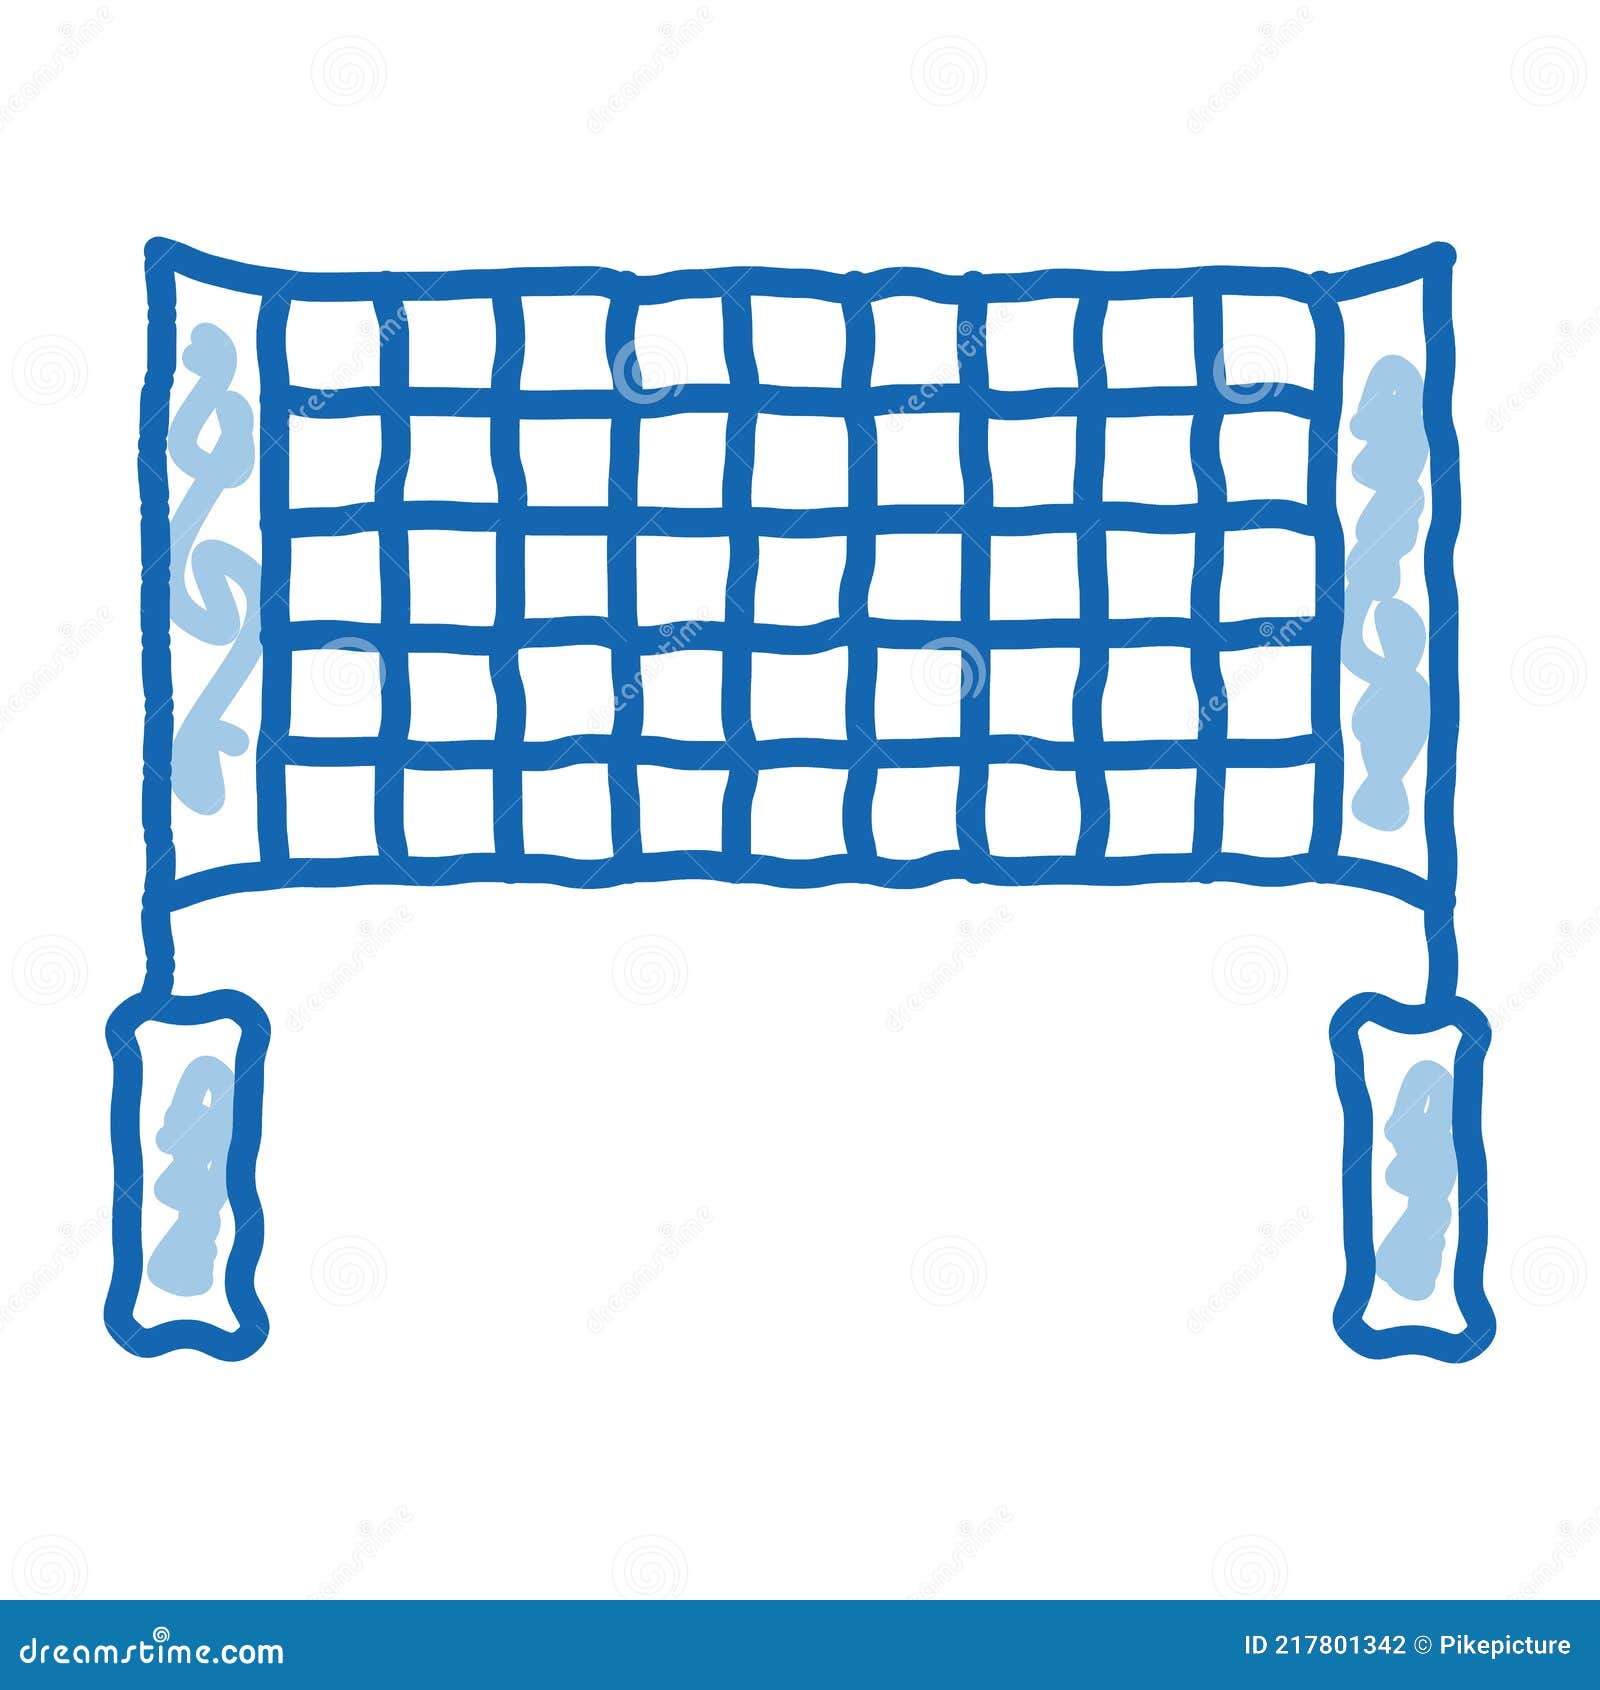 Beach Volleyball drawing free image download